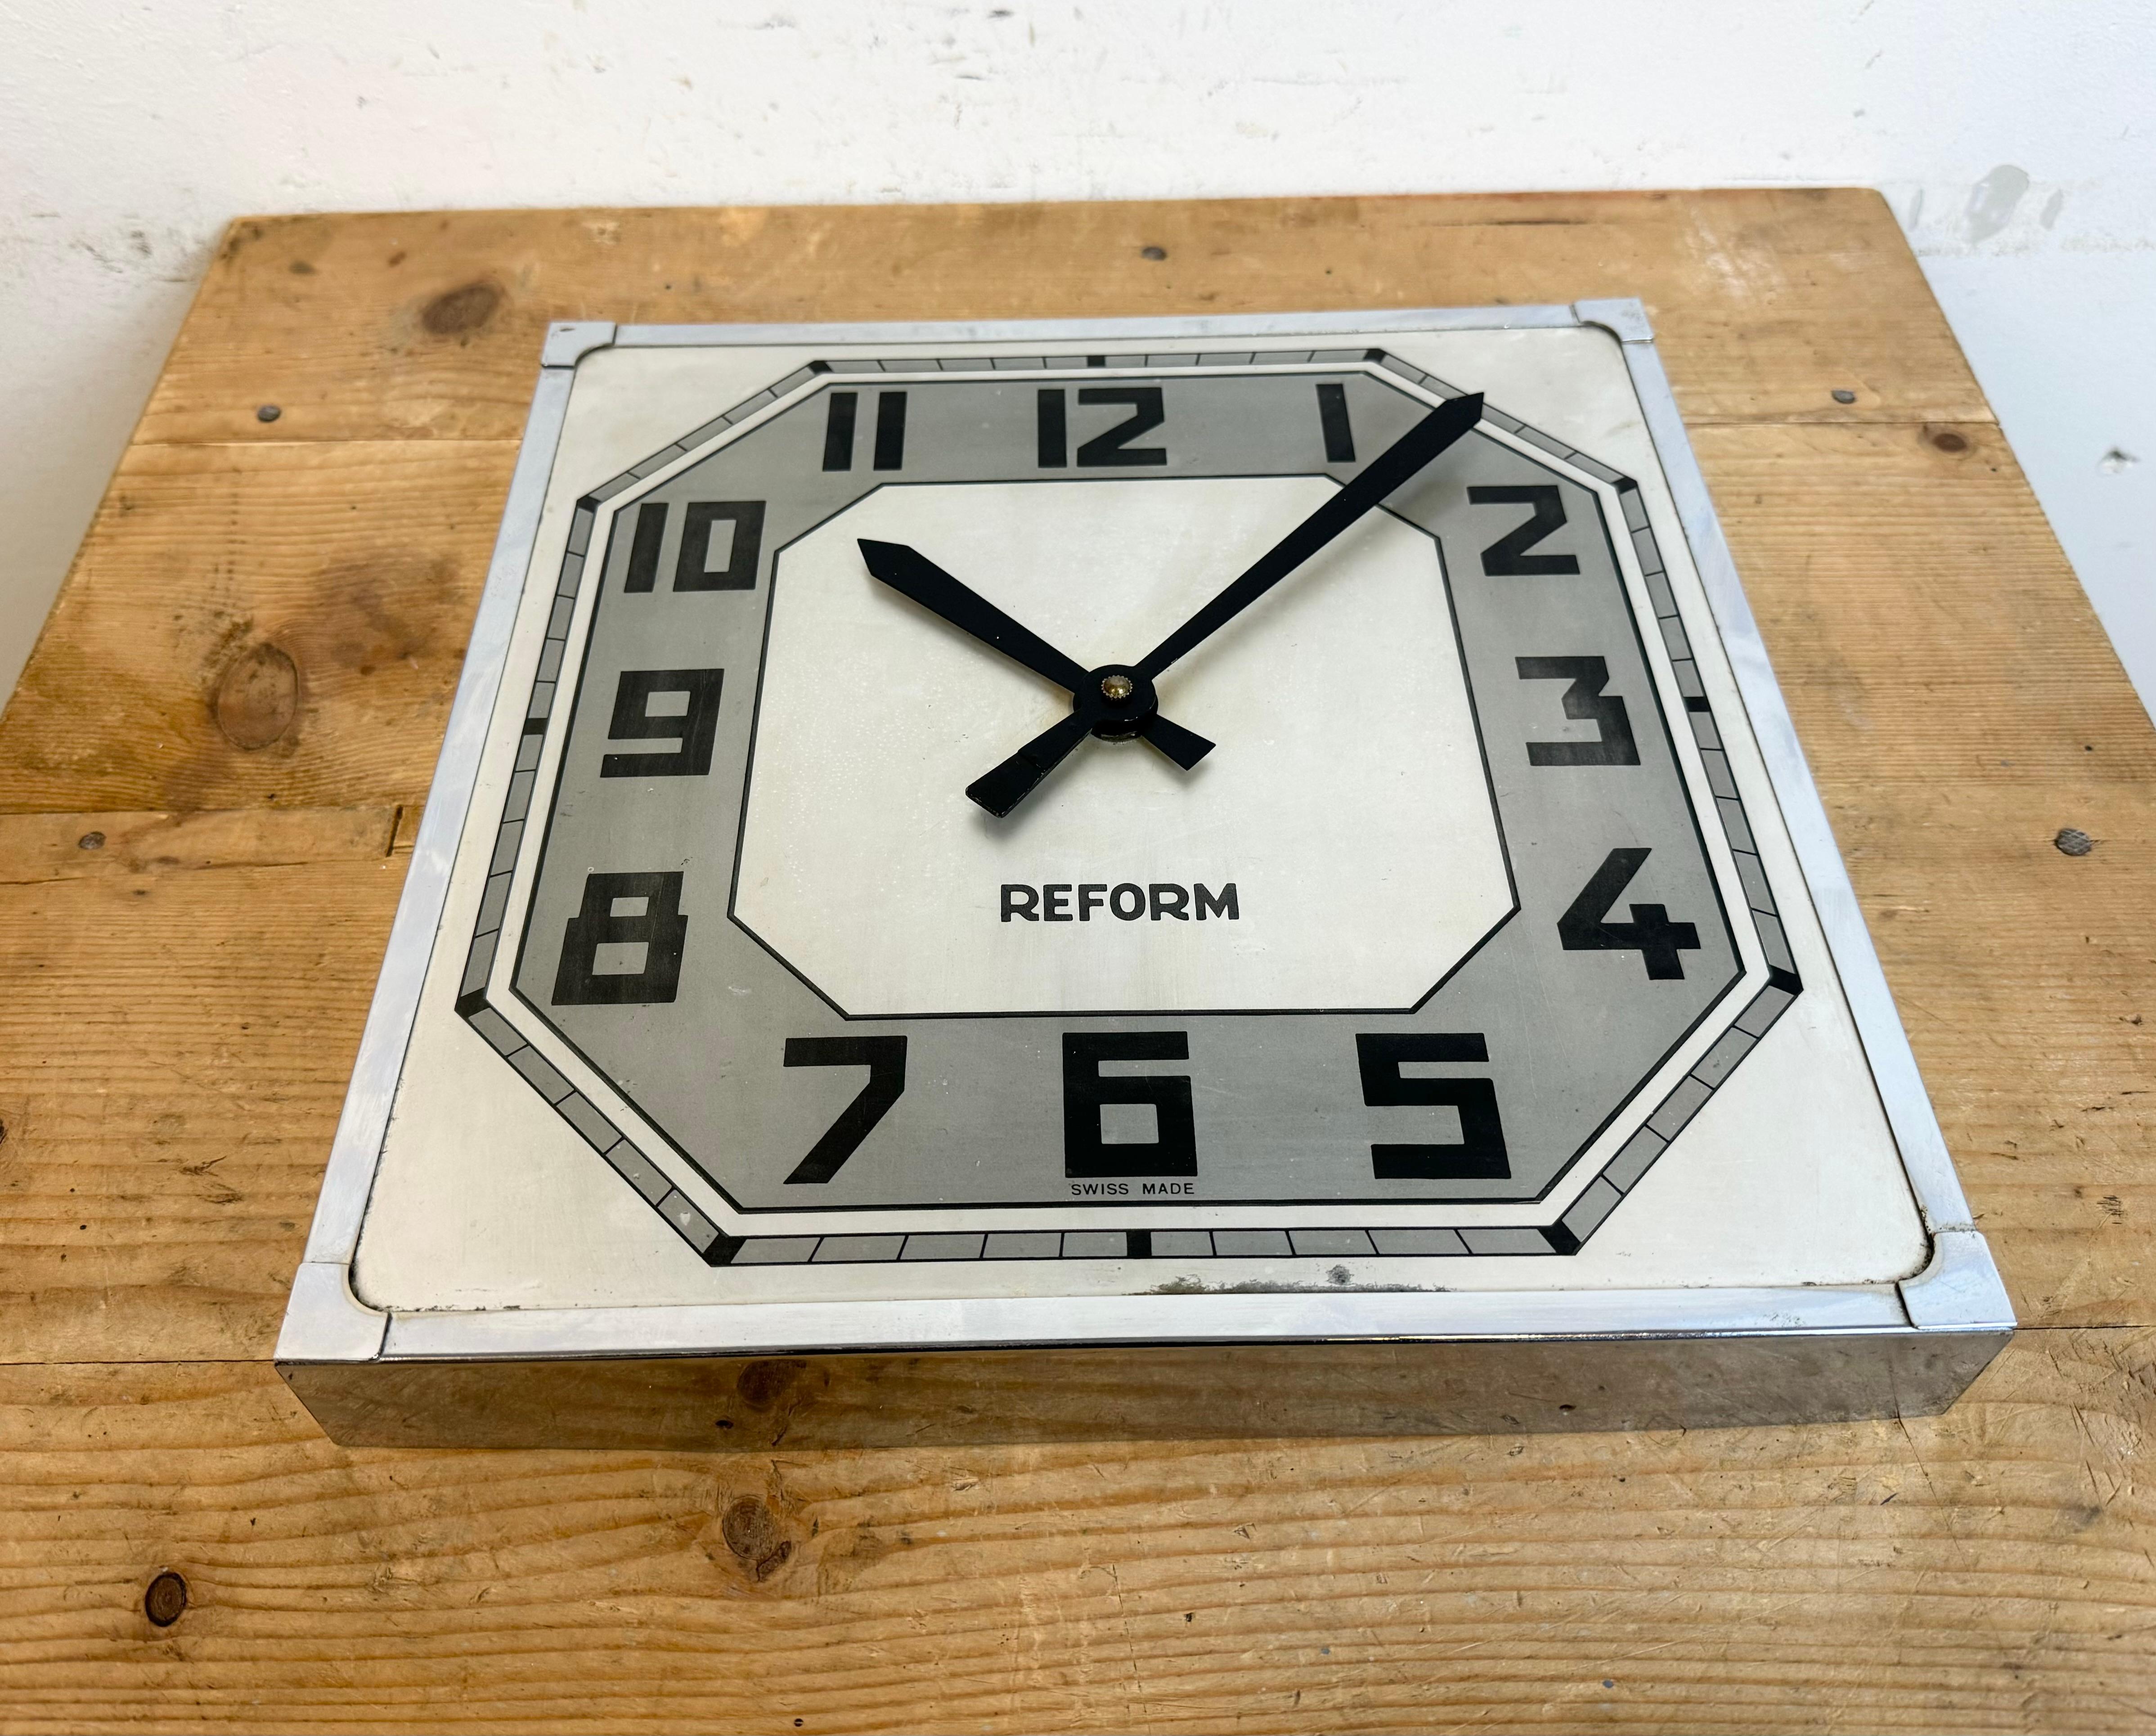 Vintage Swiss Square Wall Clock from Reform, 1950s In Good Condition For Sale In Kojetice, CZ